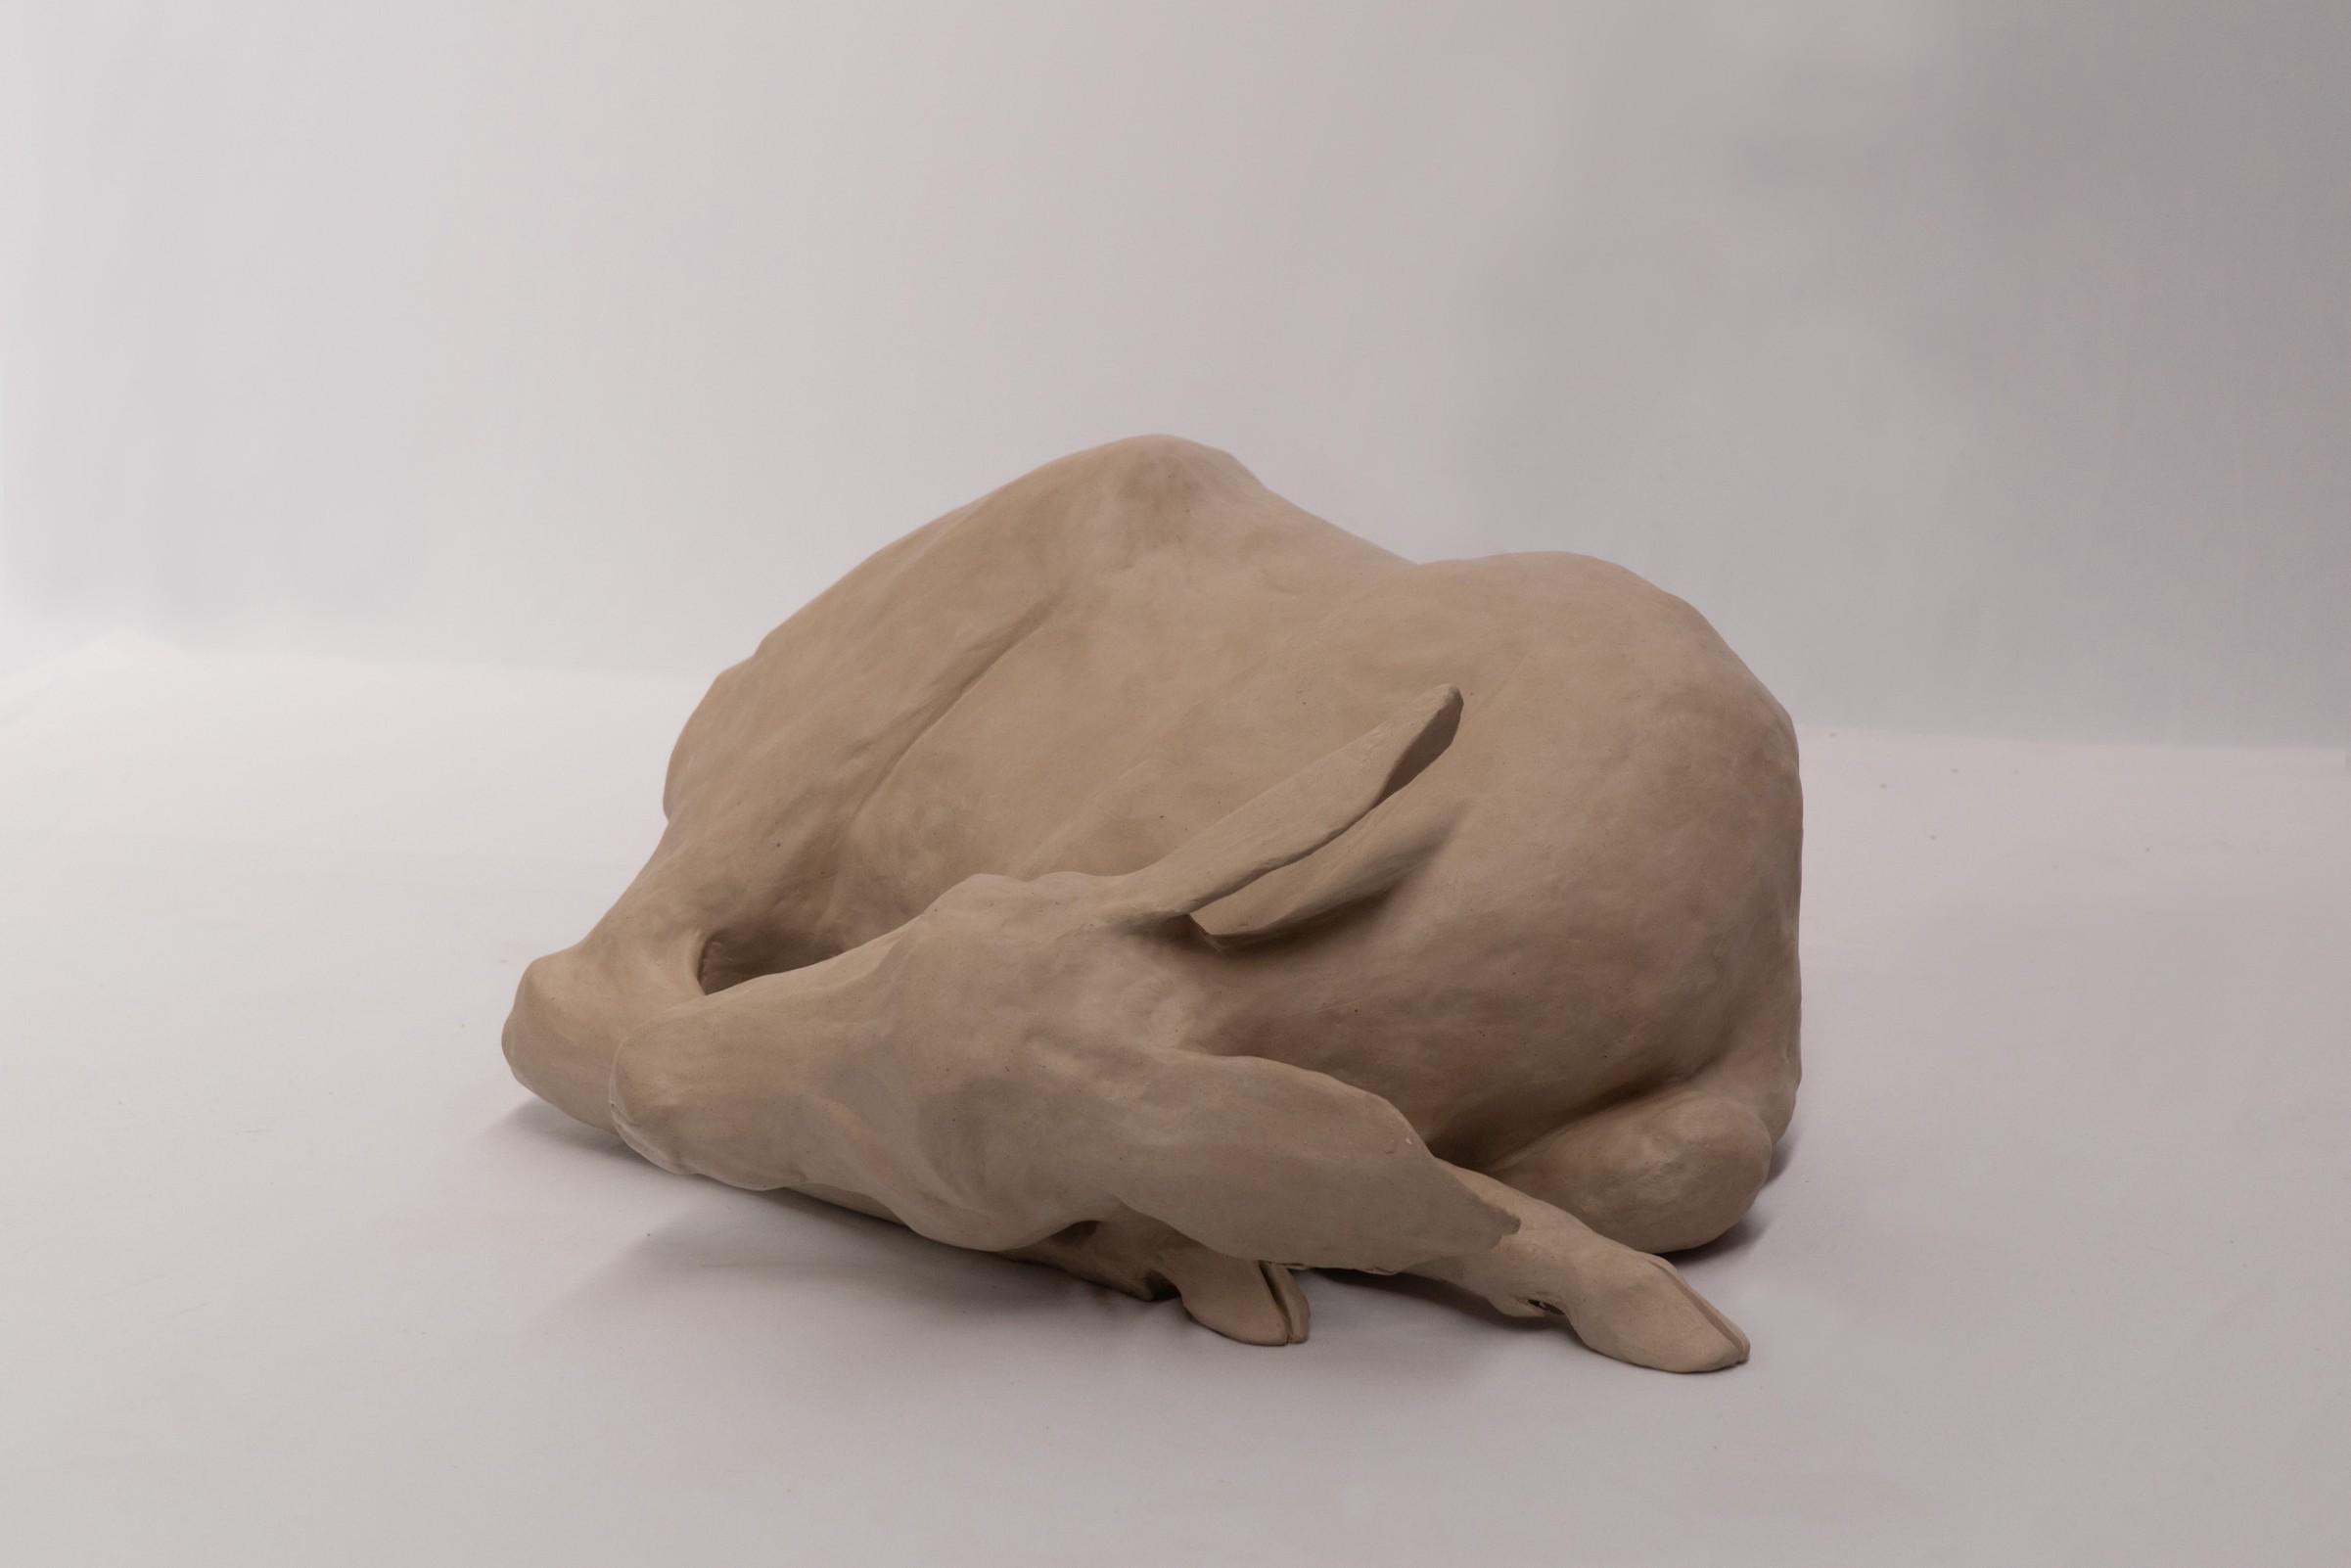 A life-size sculpture of a deer, made from unfired clay, lays huddled against a grey backdrop.